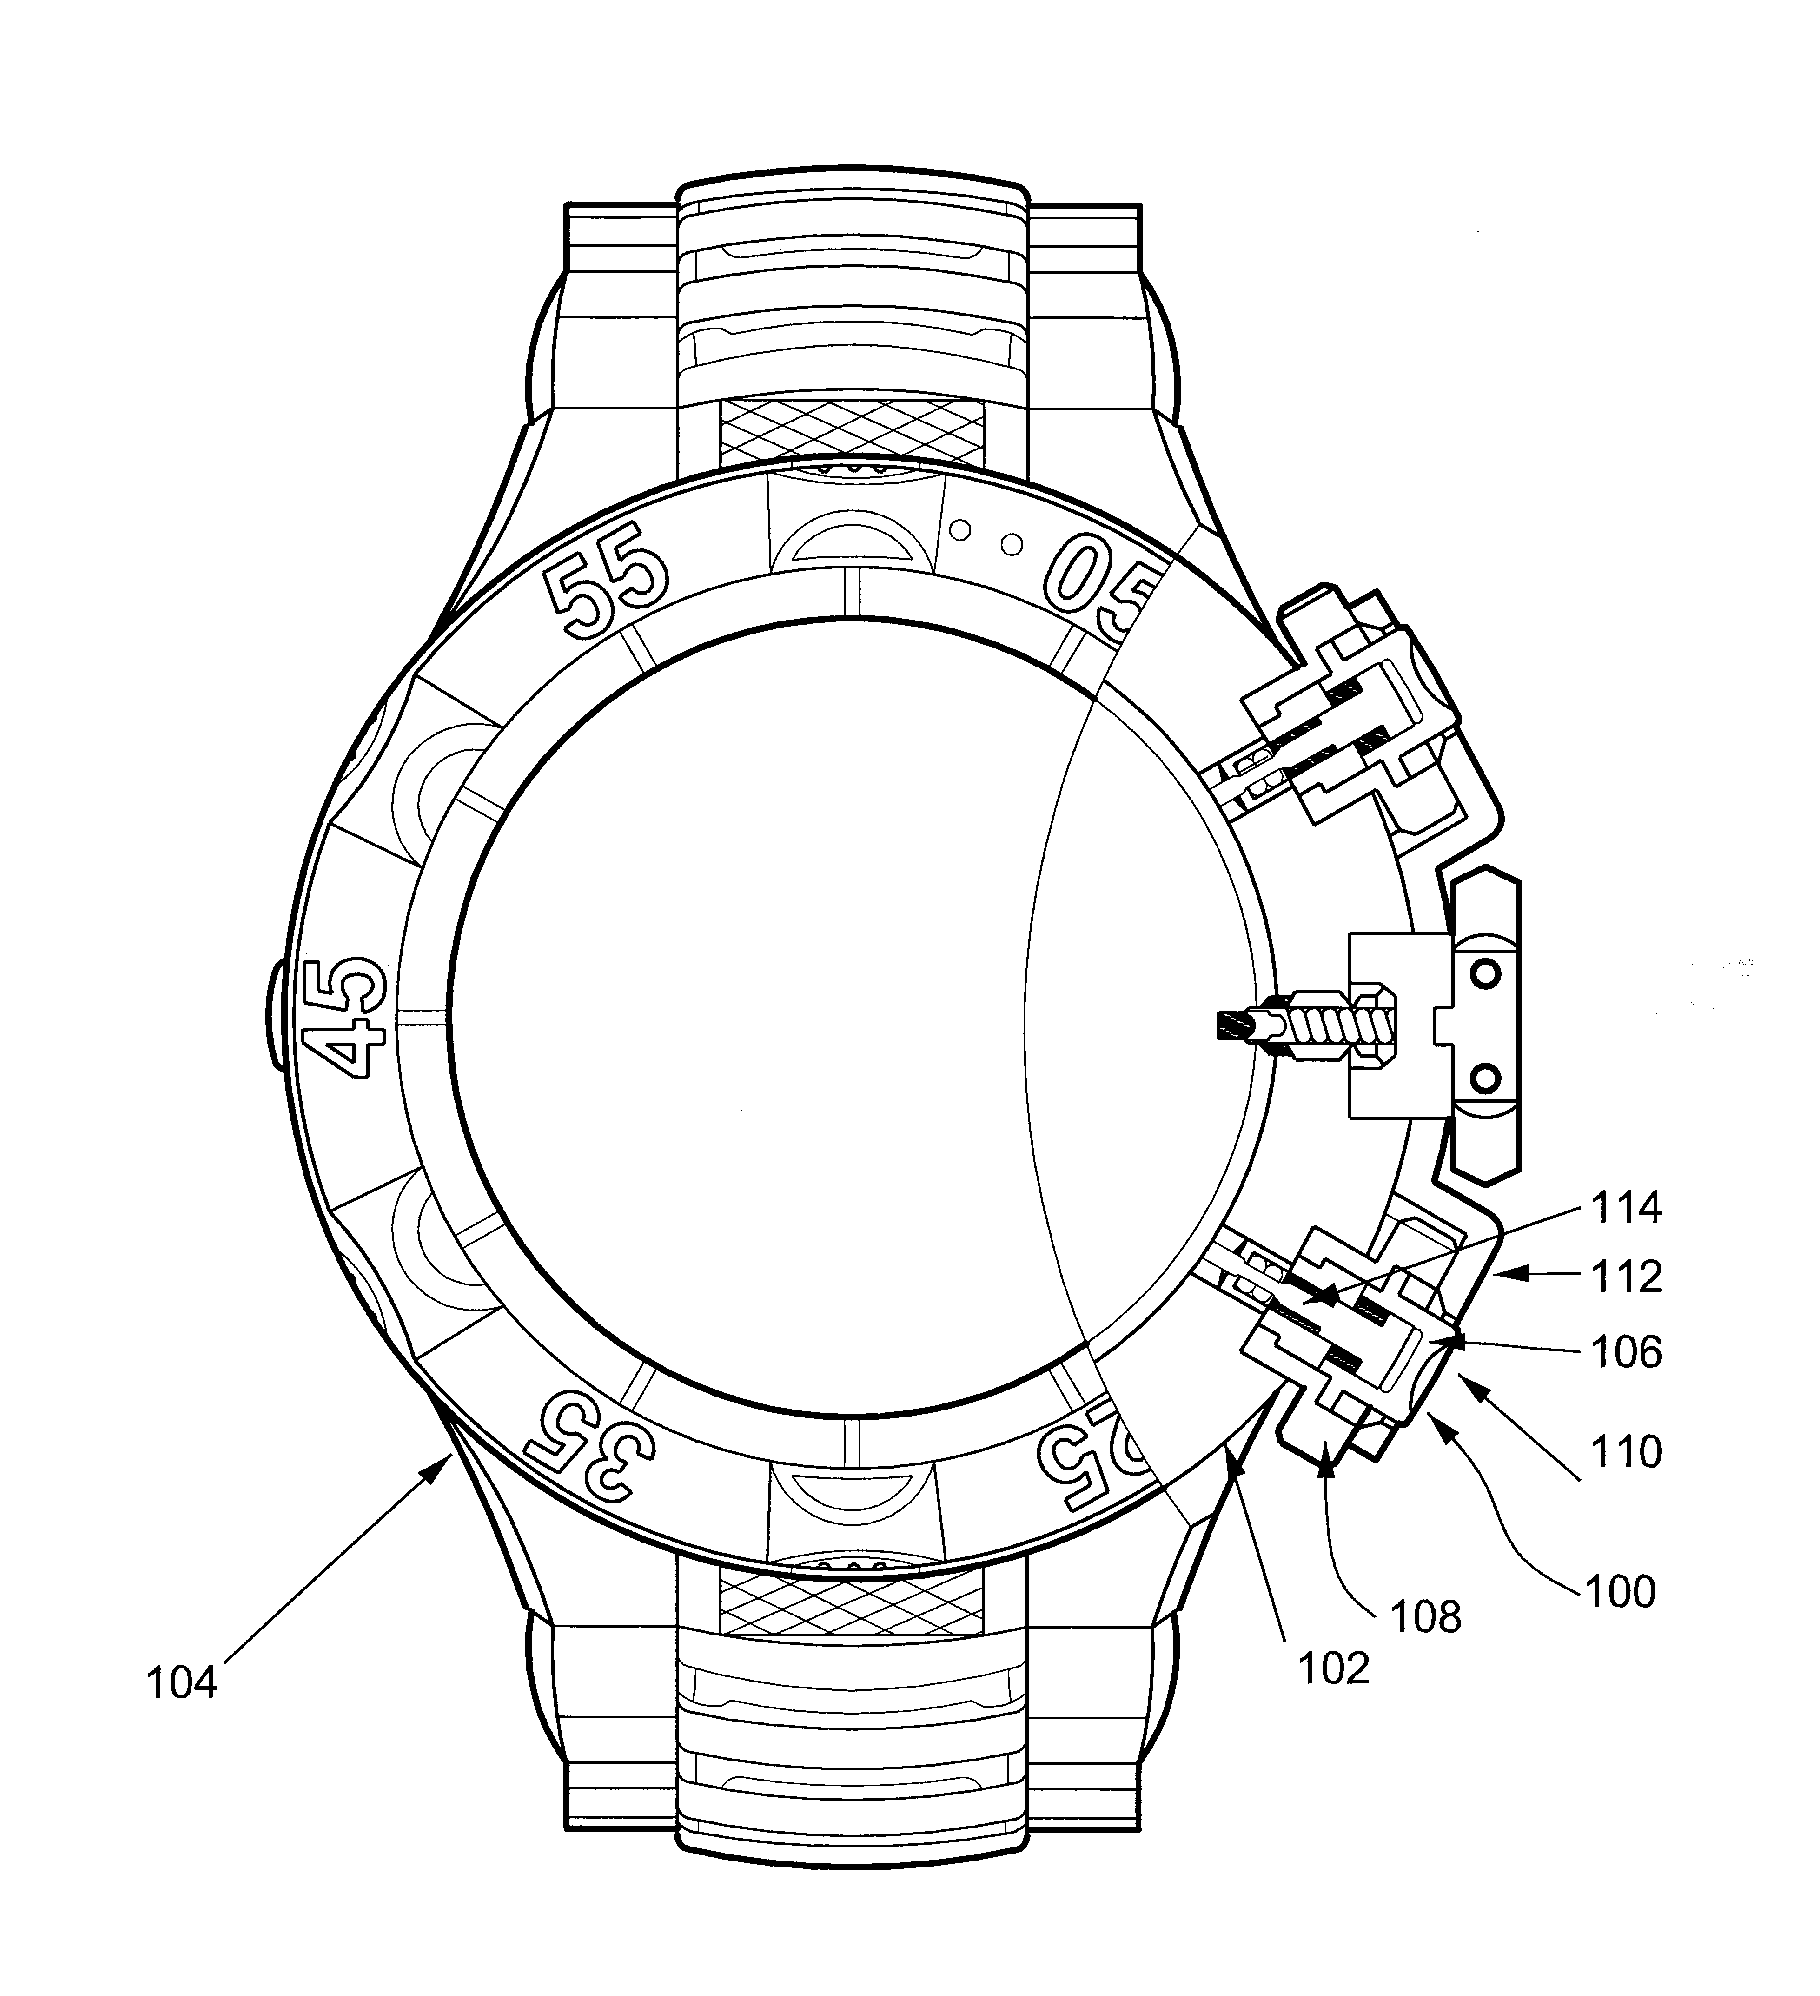 Interface for Actuating a Device